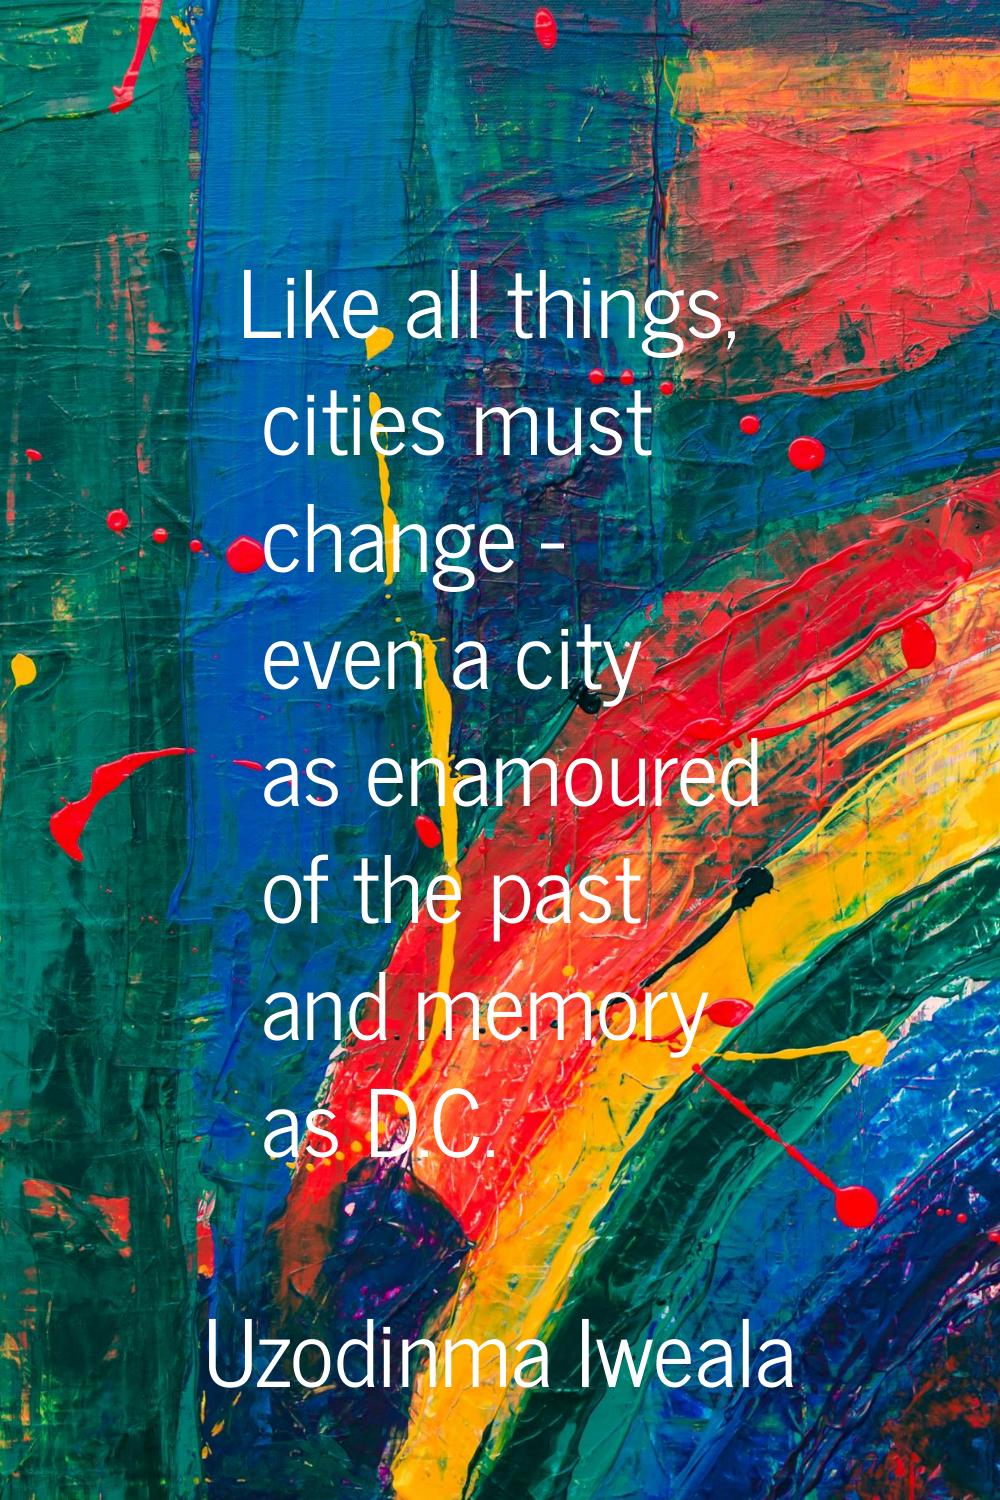 Like all things, cities must change - even a city as enamoured of the past and memory as D.C.